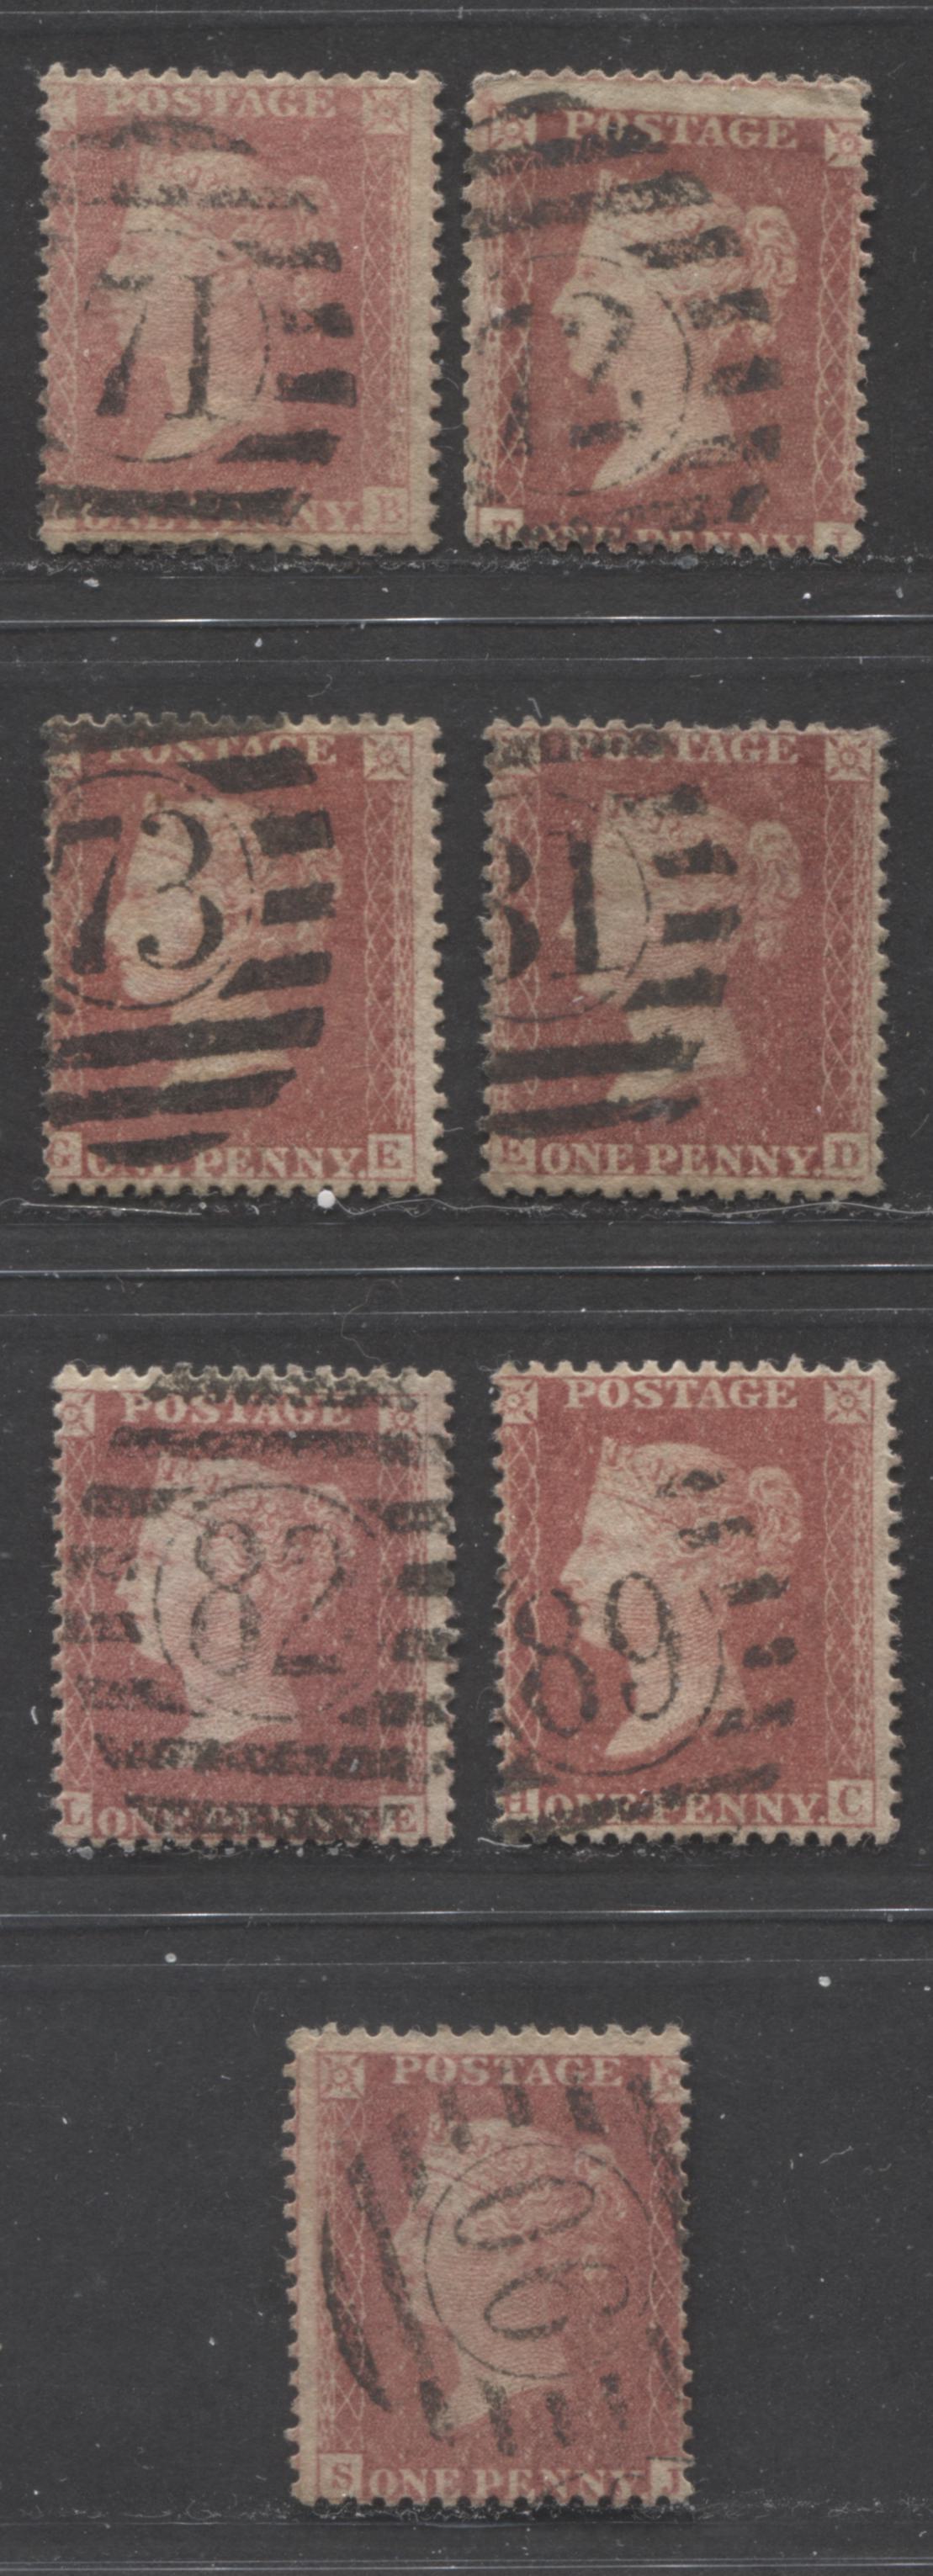 Lot  321 Great Britain - Vertical Numeral London Duplex Cancels SC#20 1d Rose Red & Pale Rose Red 1857-1863 1d Red Stars, Large Crown, White Paper, Perf. 14 Issue, 71-73, 81-82, 89-90 , 7 Good & VG Used Singles, Estimated Value $20